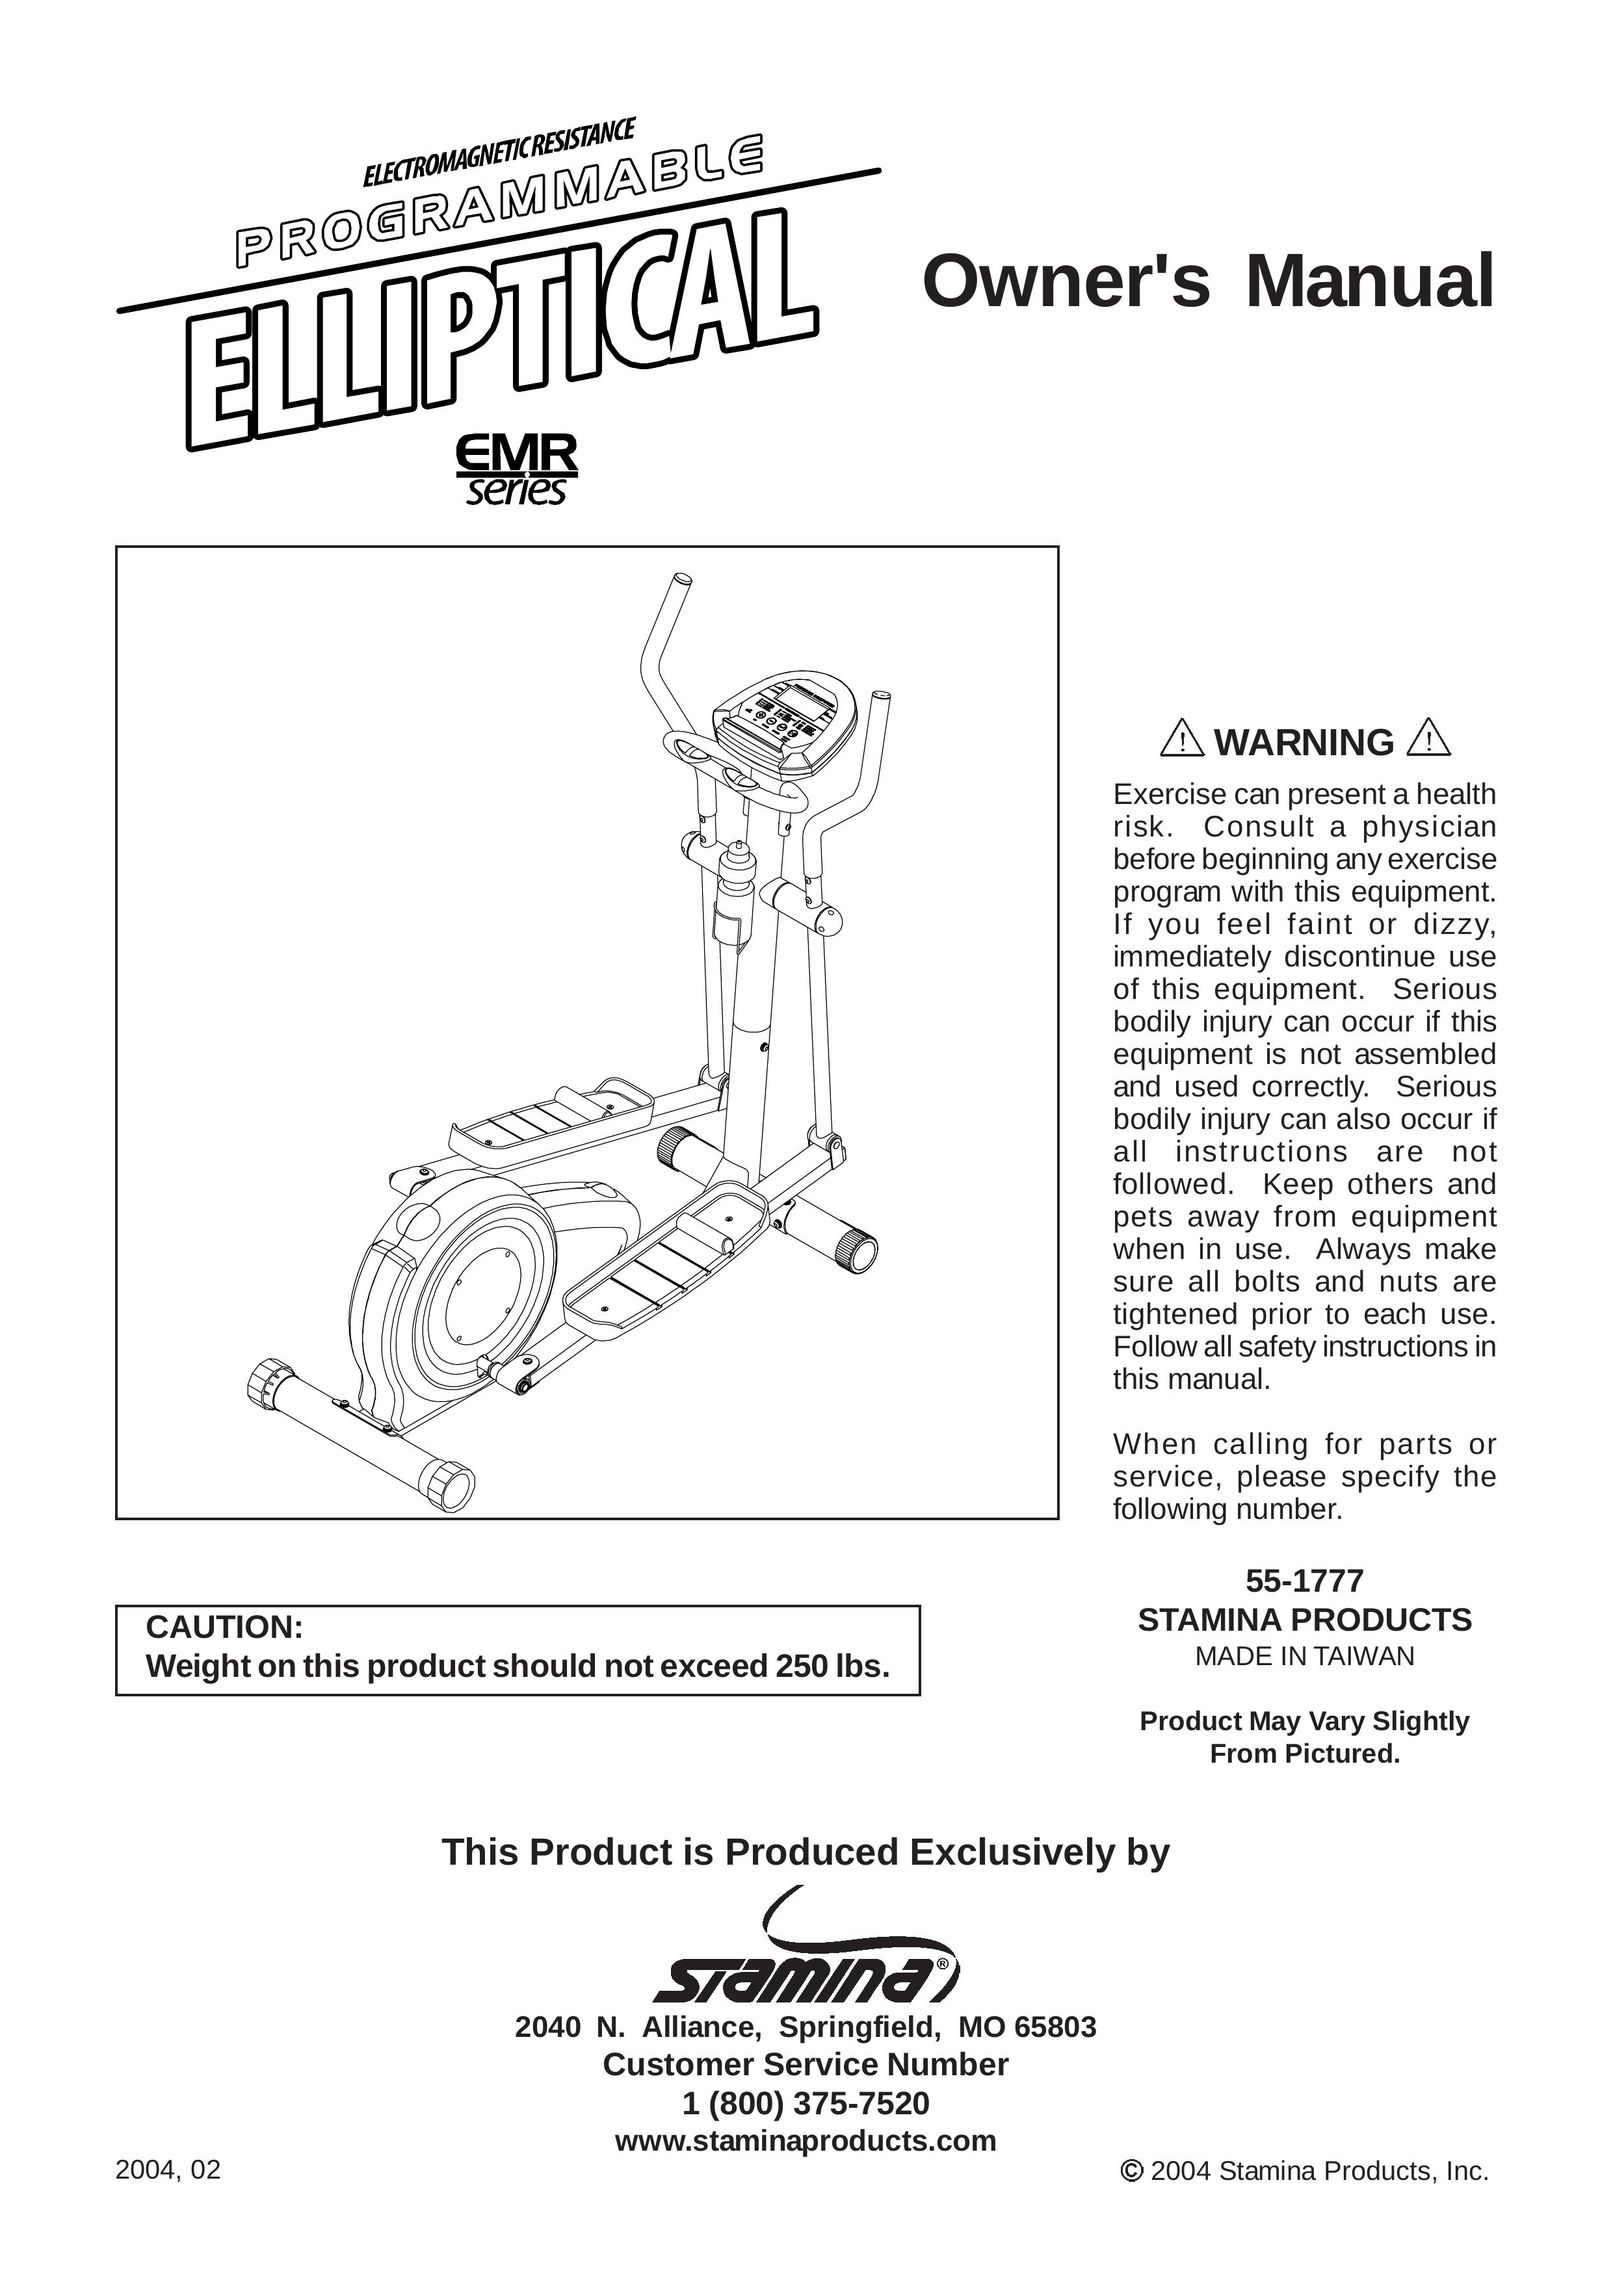 Stamina Products 55-1777 Elliptical Trainer User Manual